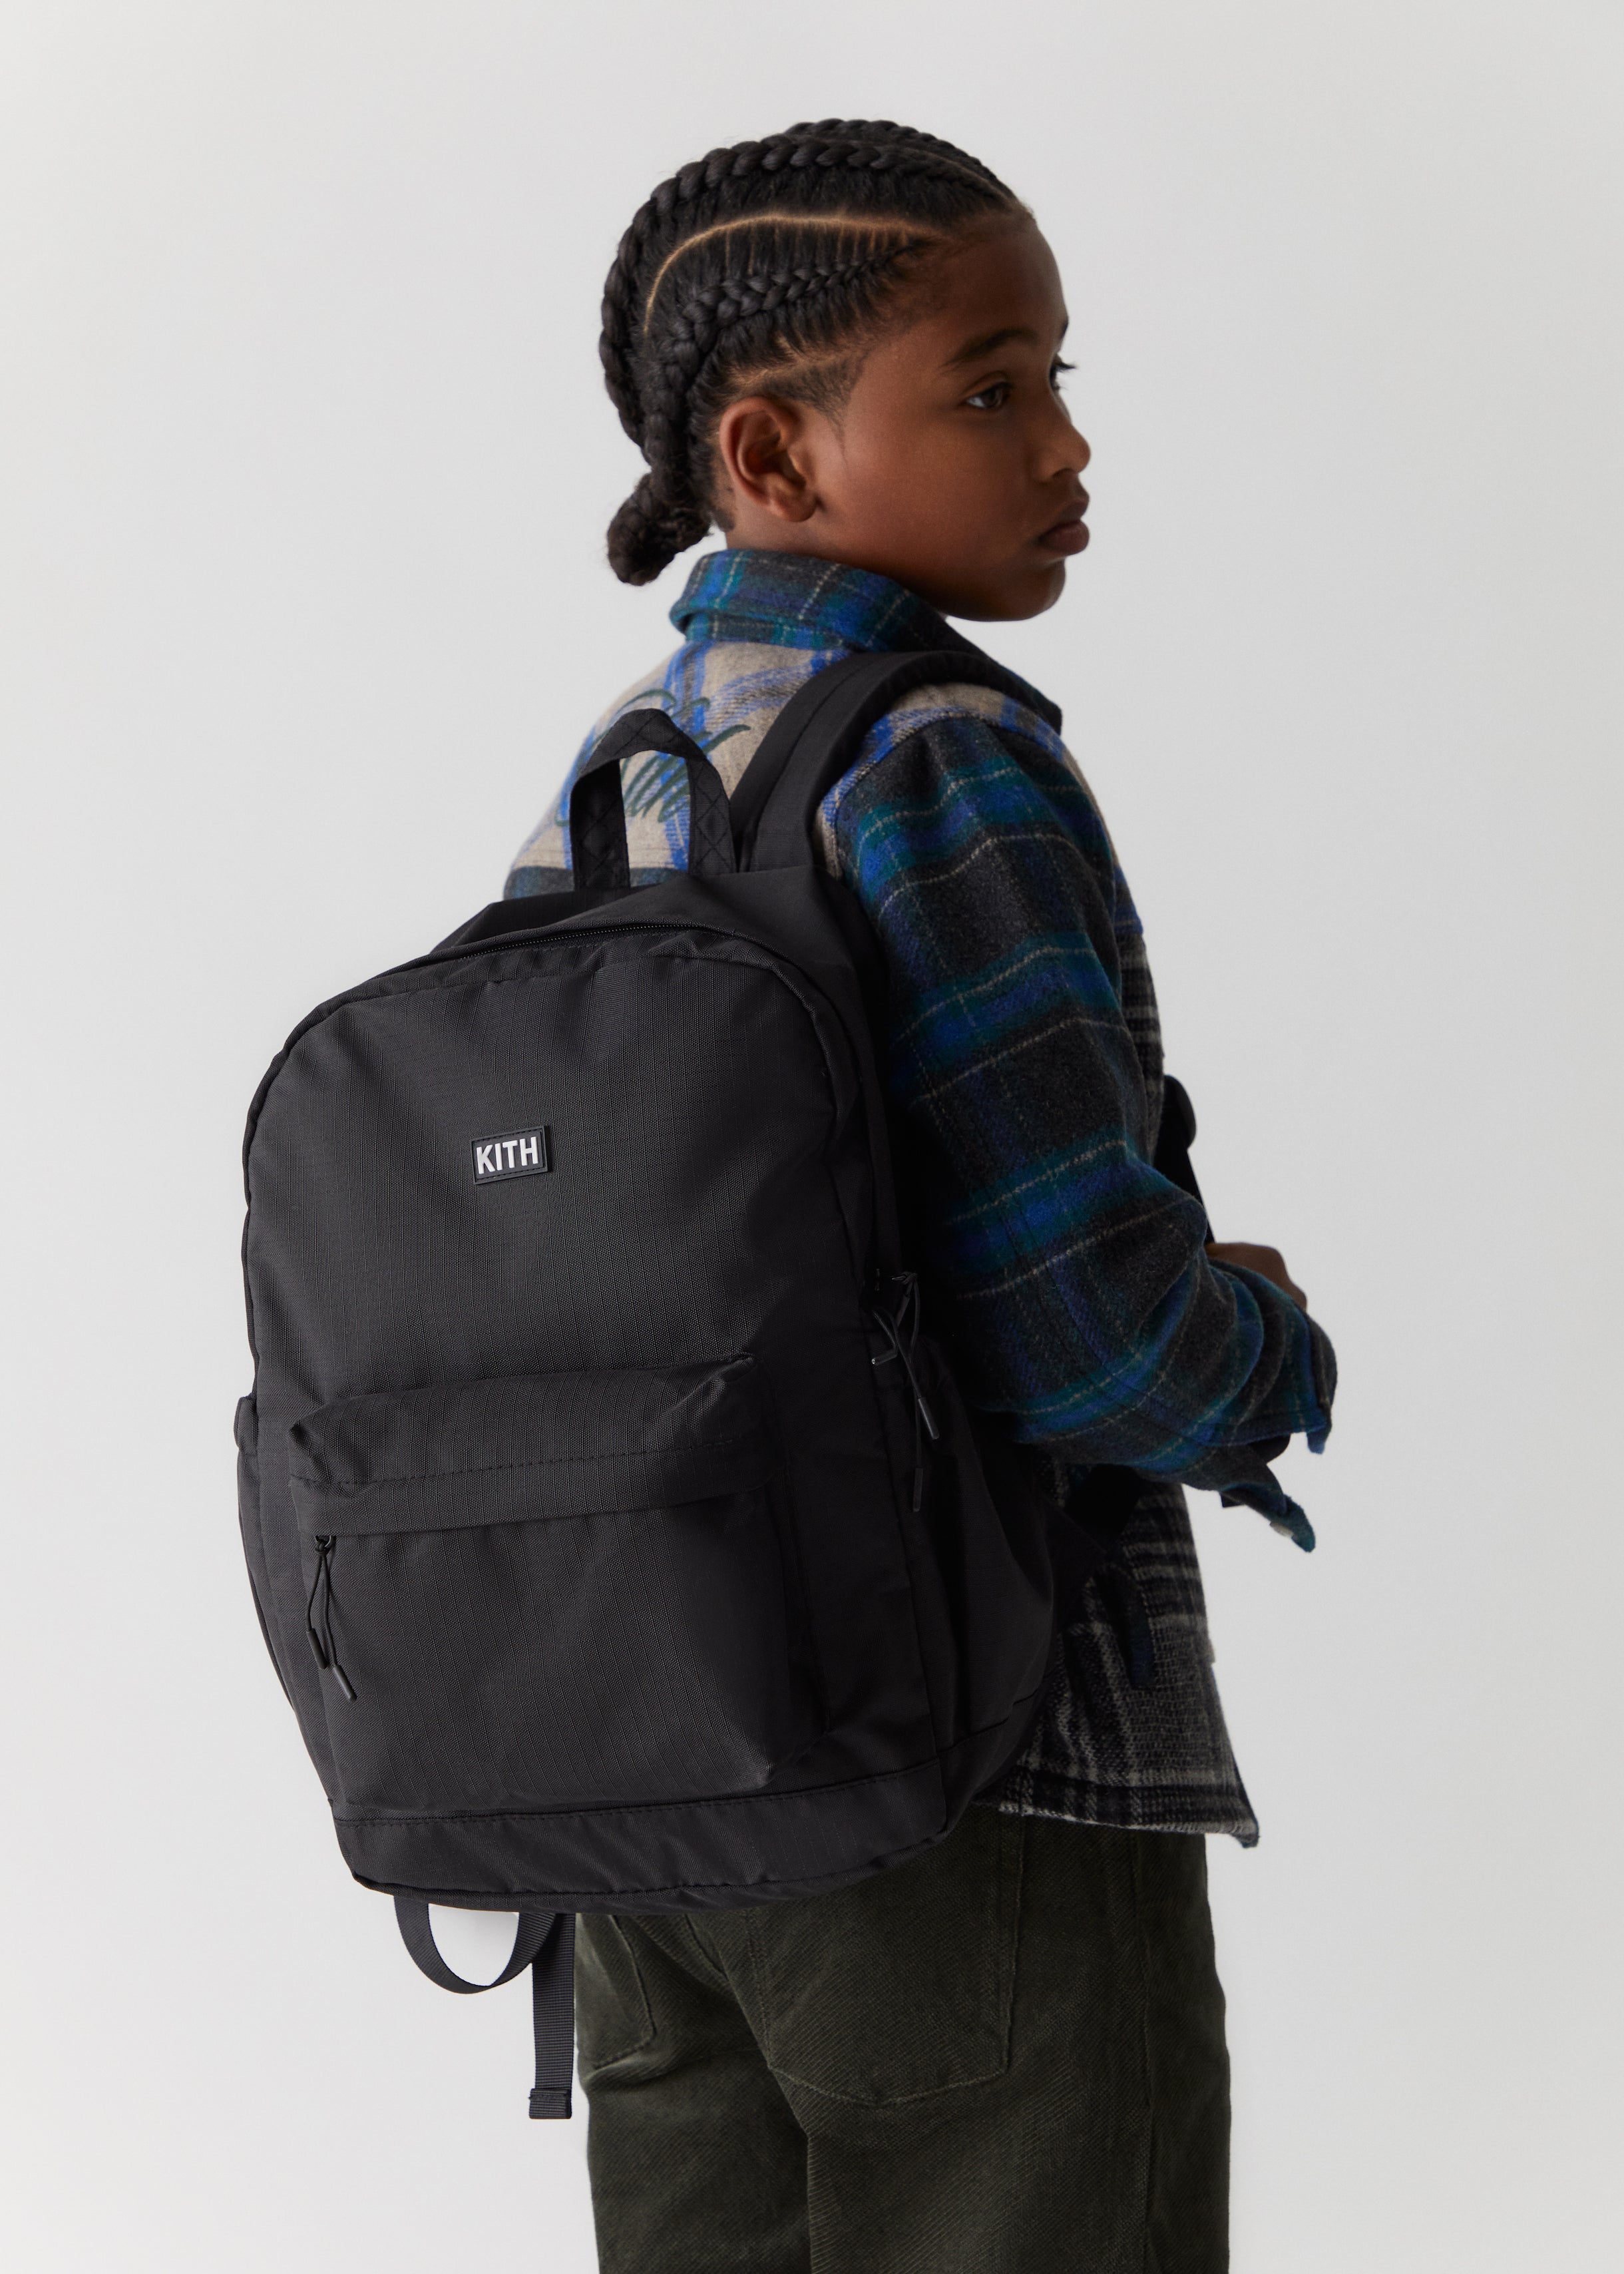 A child wearing a black Kith branded backpack and blue flannel shirt from the Kith Kids Fall Classics 2023 collection.